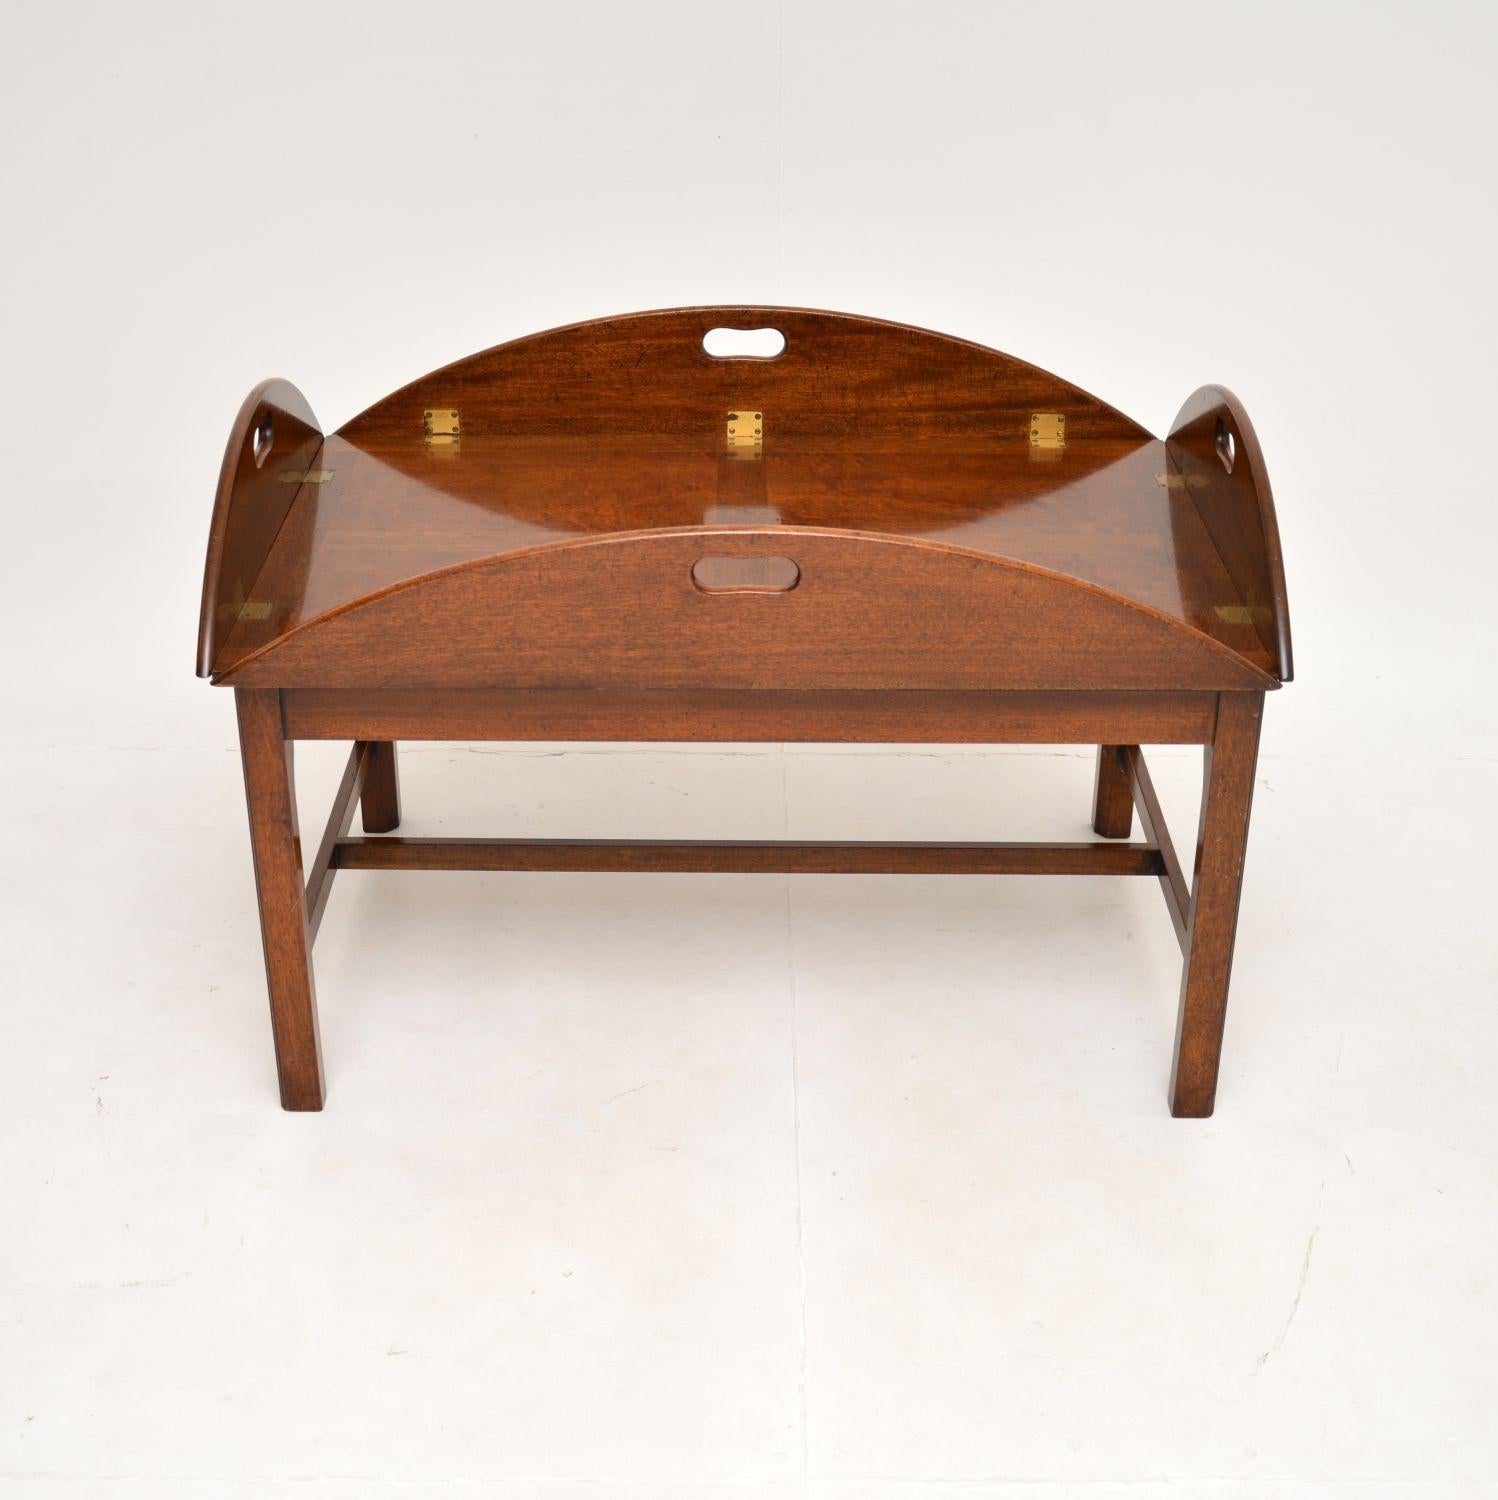 A fantastic large antique butlers tray top coffee table. This was made in England, it dates from around the 1950’s.

It is an impressive size and is of superb quality. The large oval top has edges that fold up, with built in carry handles. It lifts